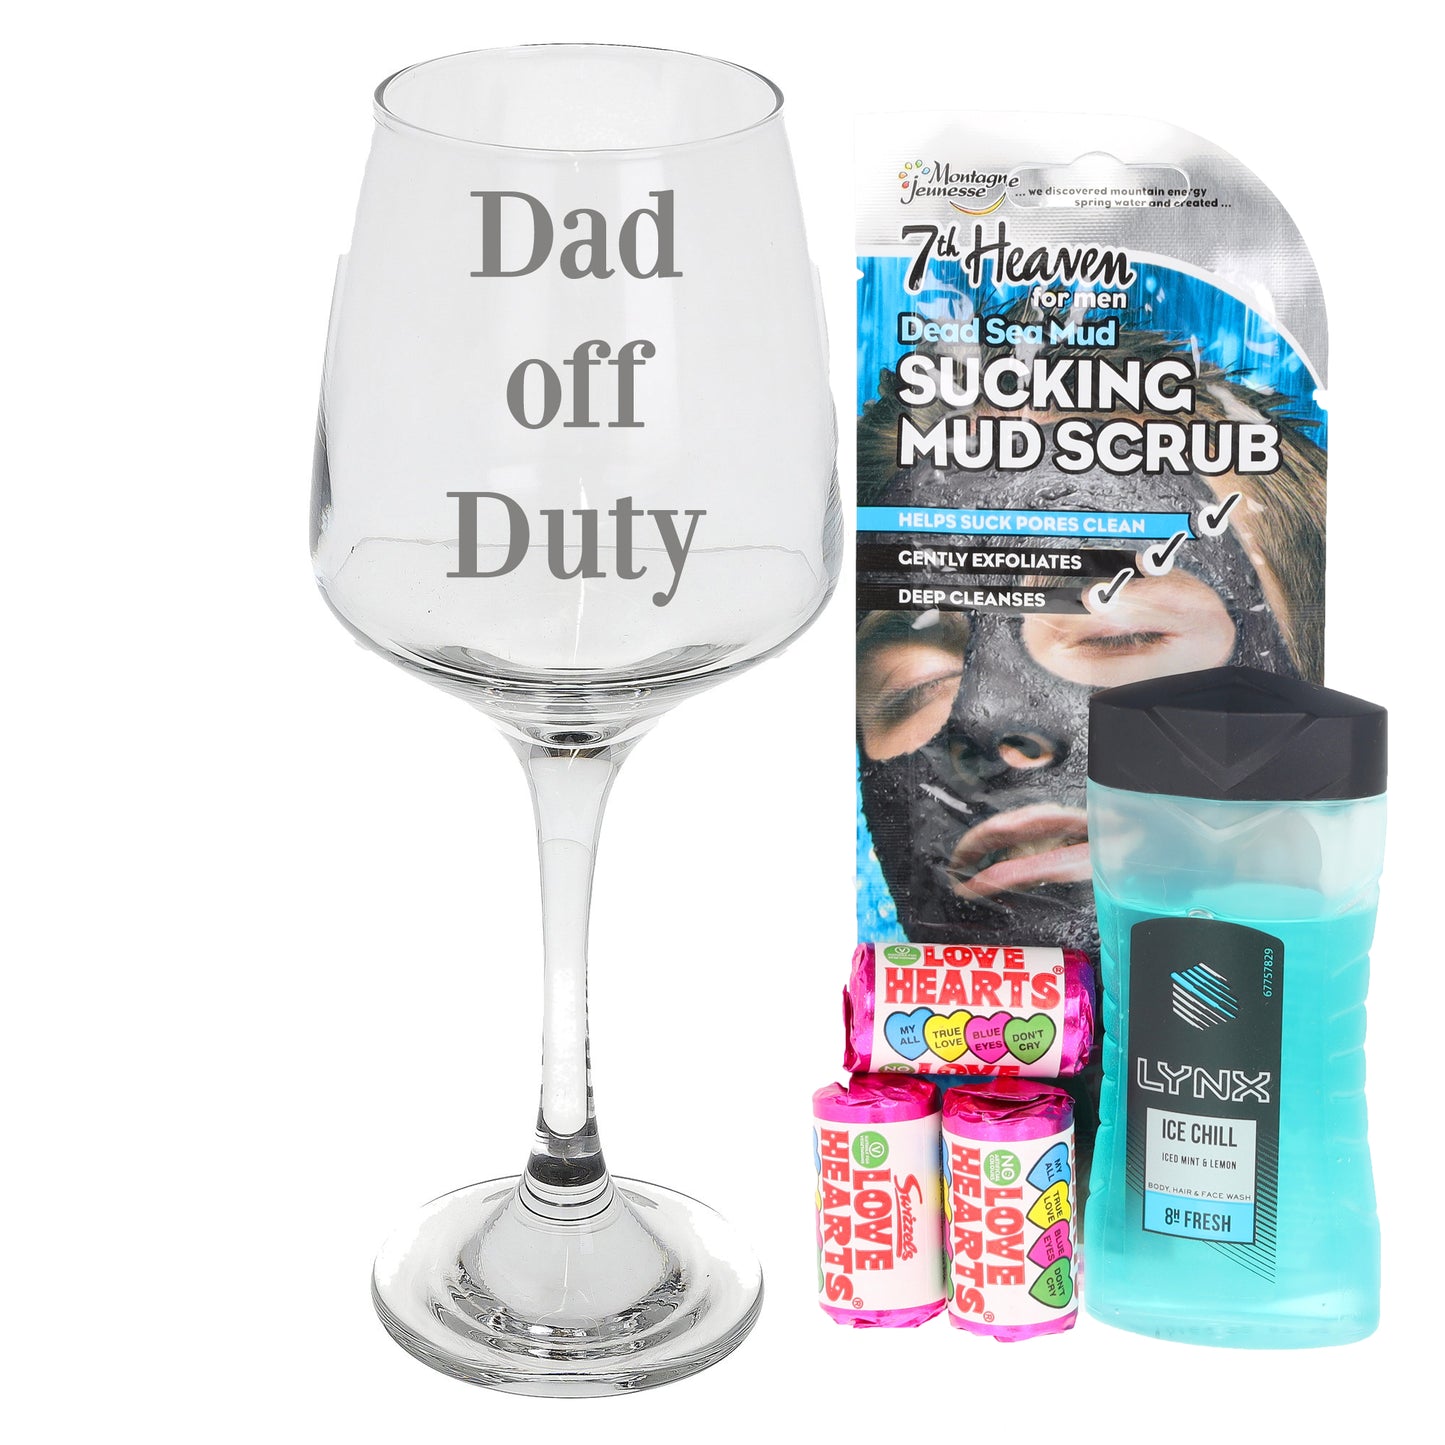 Create Your Own Personalised Engraved Wine Glass  - Always Looking Good -   